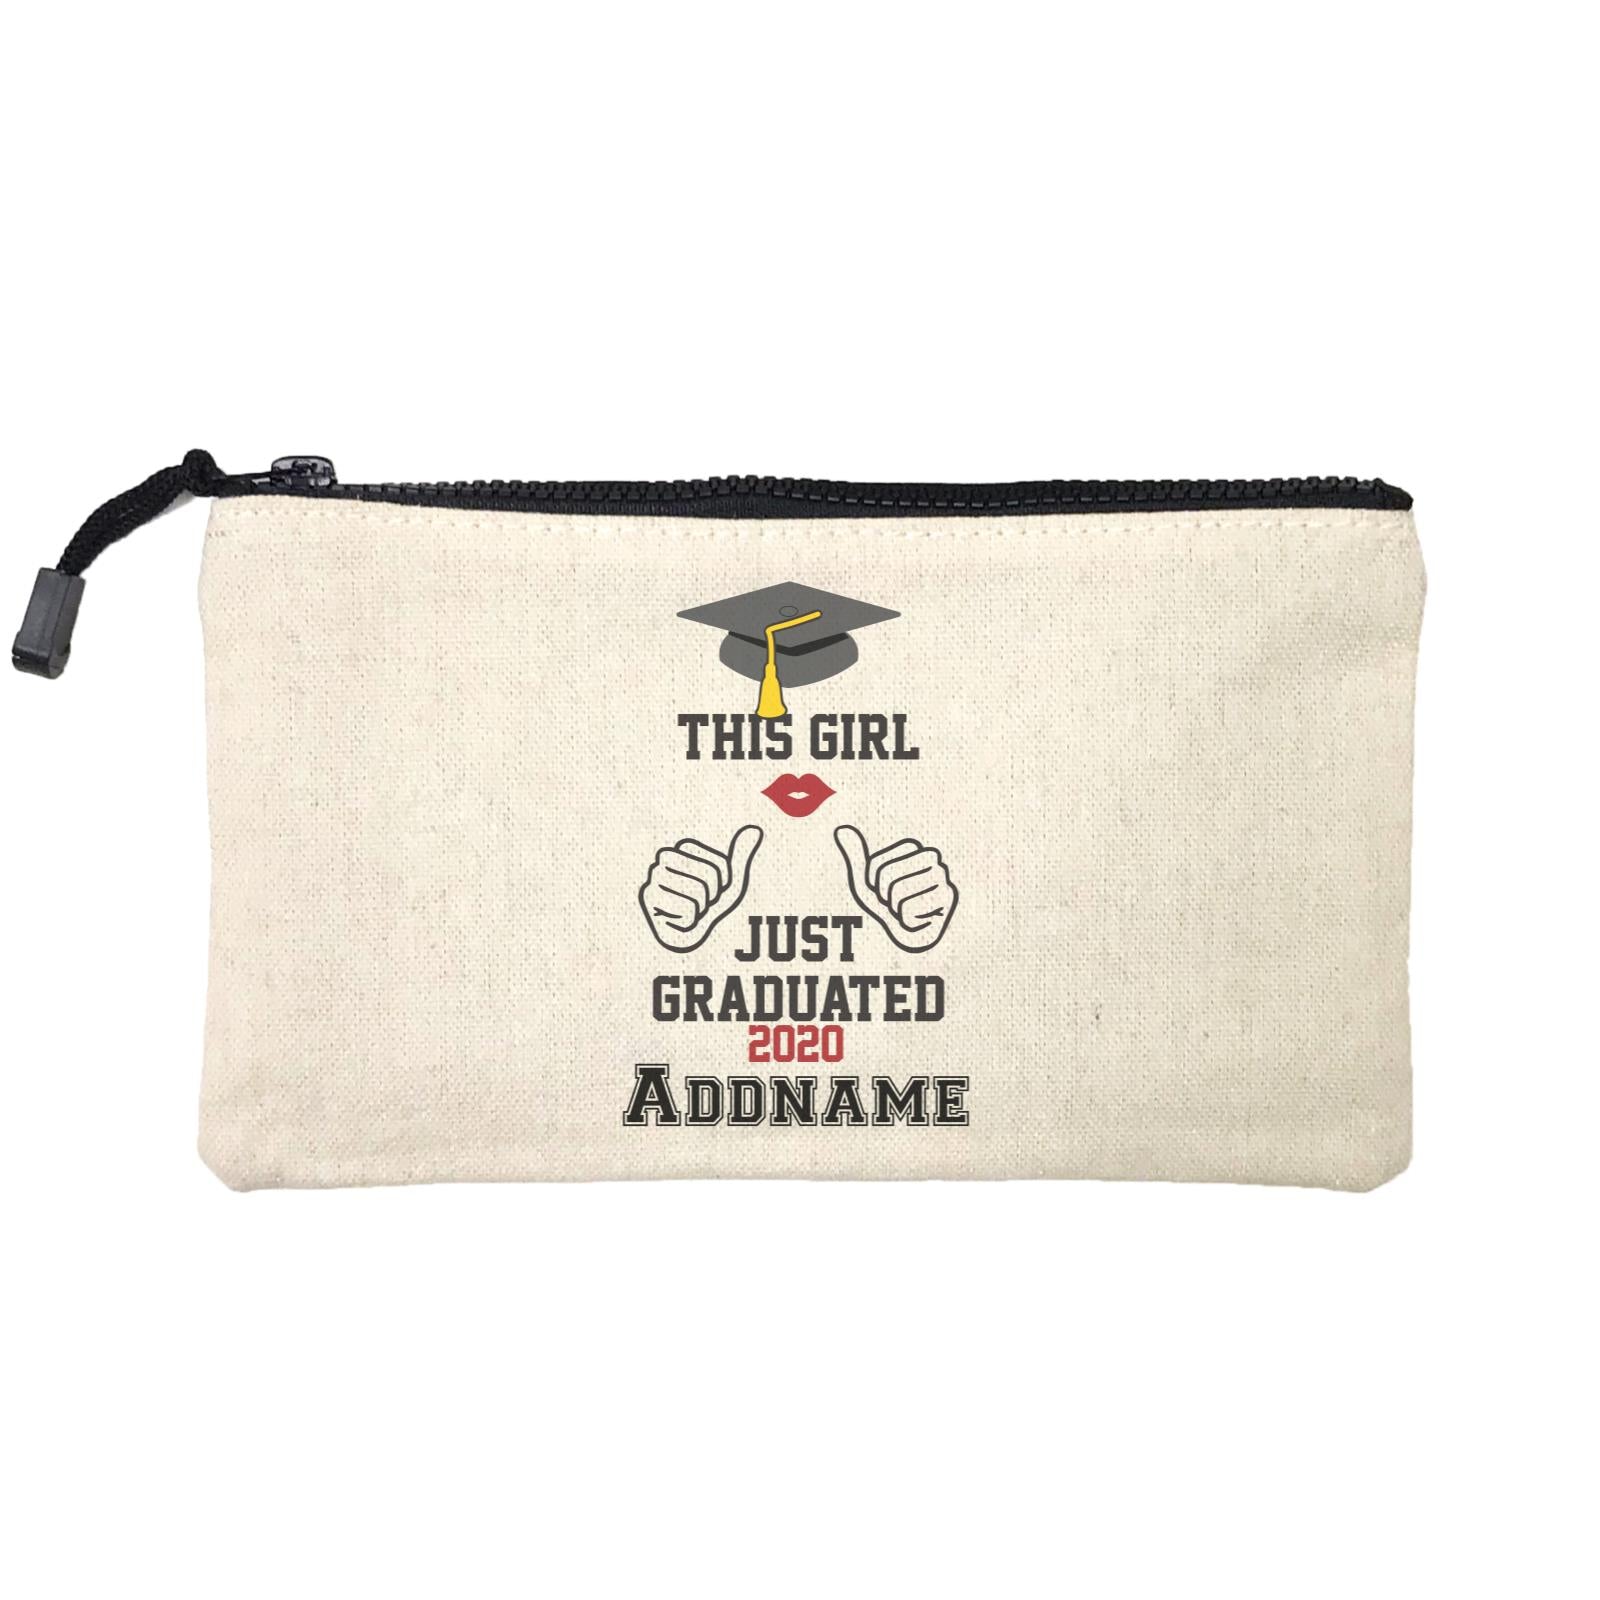 Graduation Series This Girl Just Graduated Mini Accessories Stationery Pouch